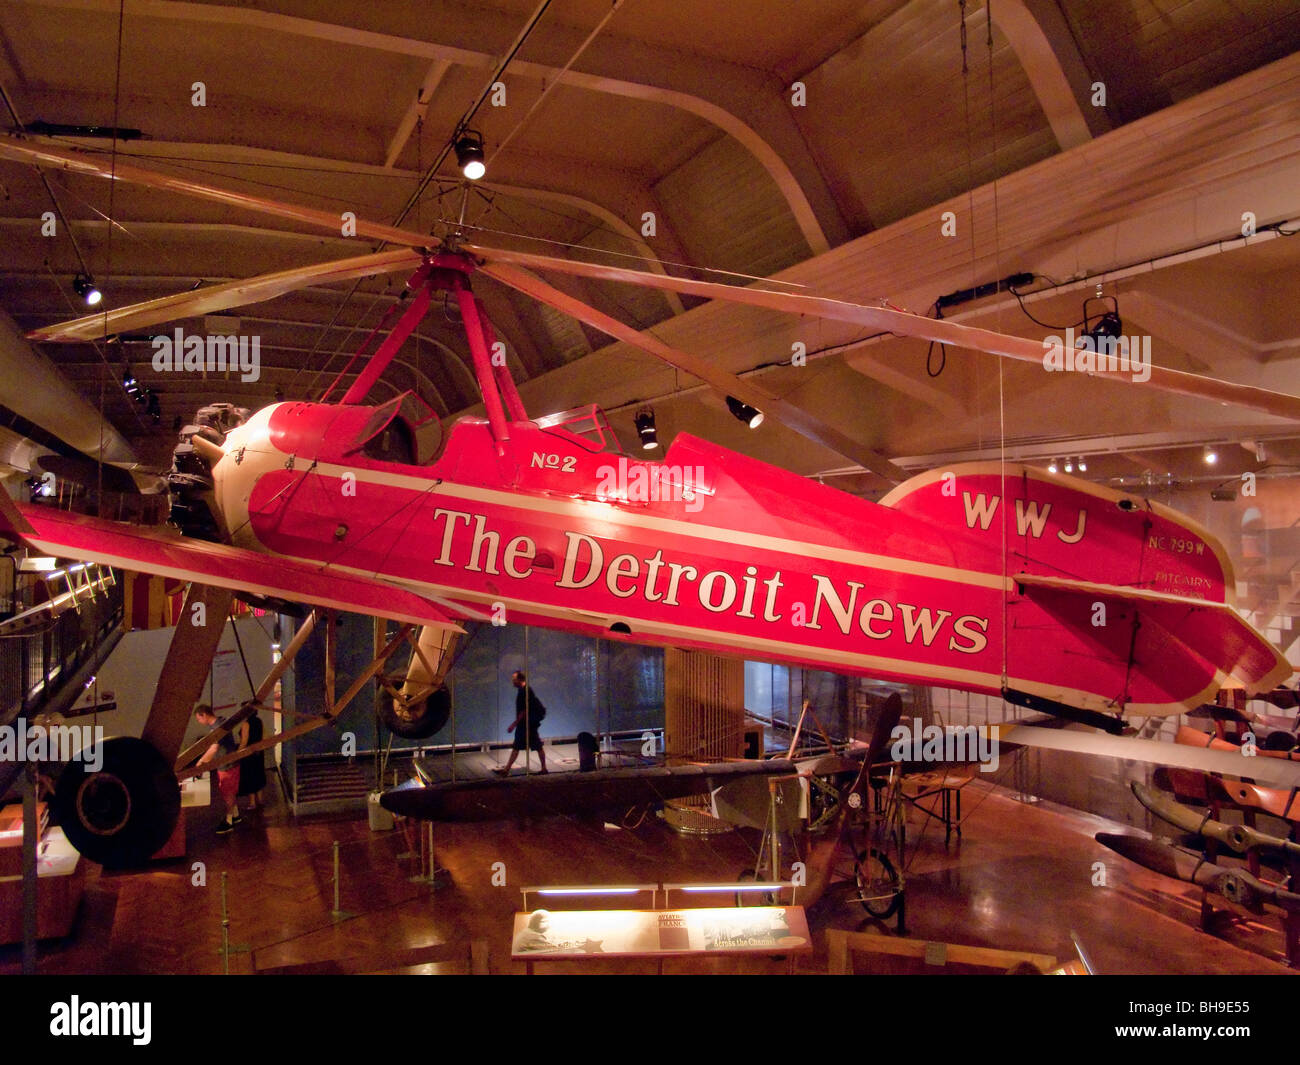 A 1931 Pitcairn Autogyro once owned by the Detroit News is on display at the Henry Ford Museum in Dearborn, Michigan Stock Photo